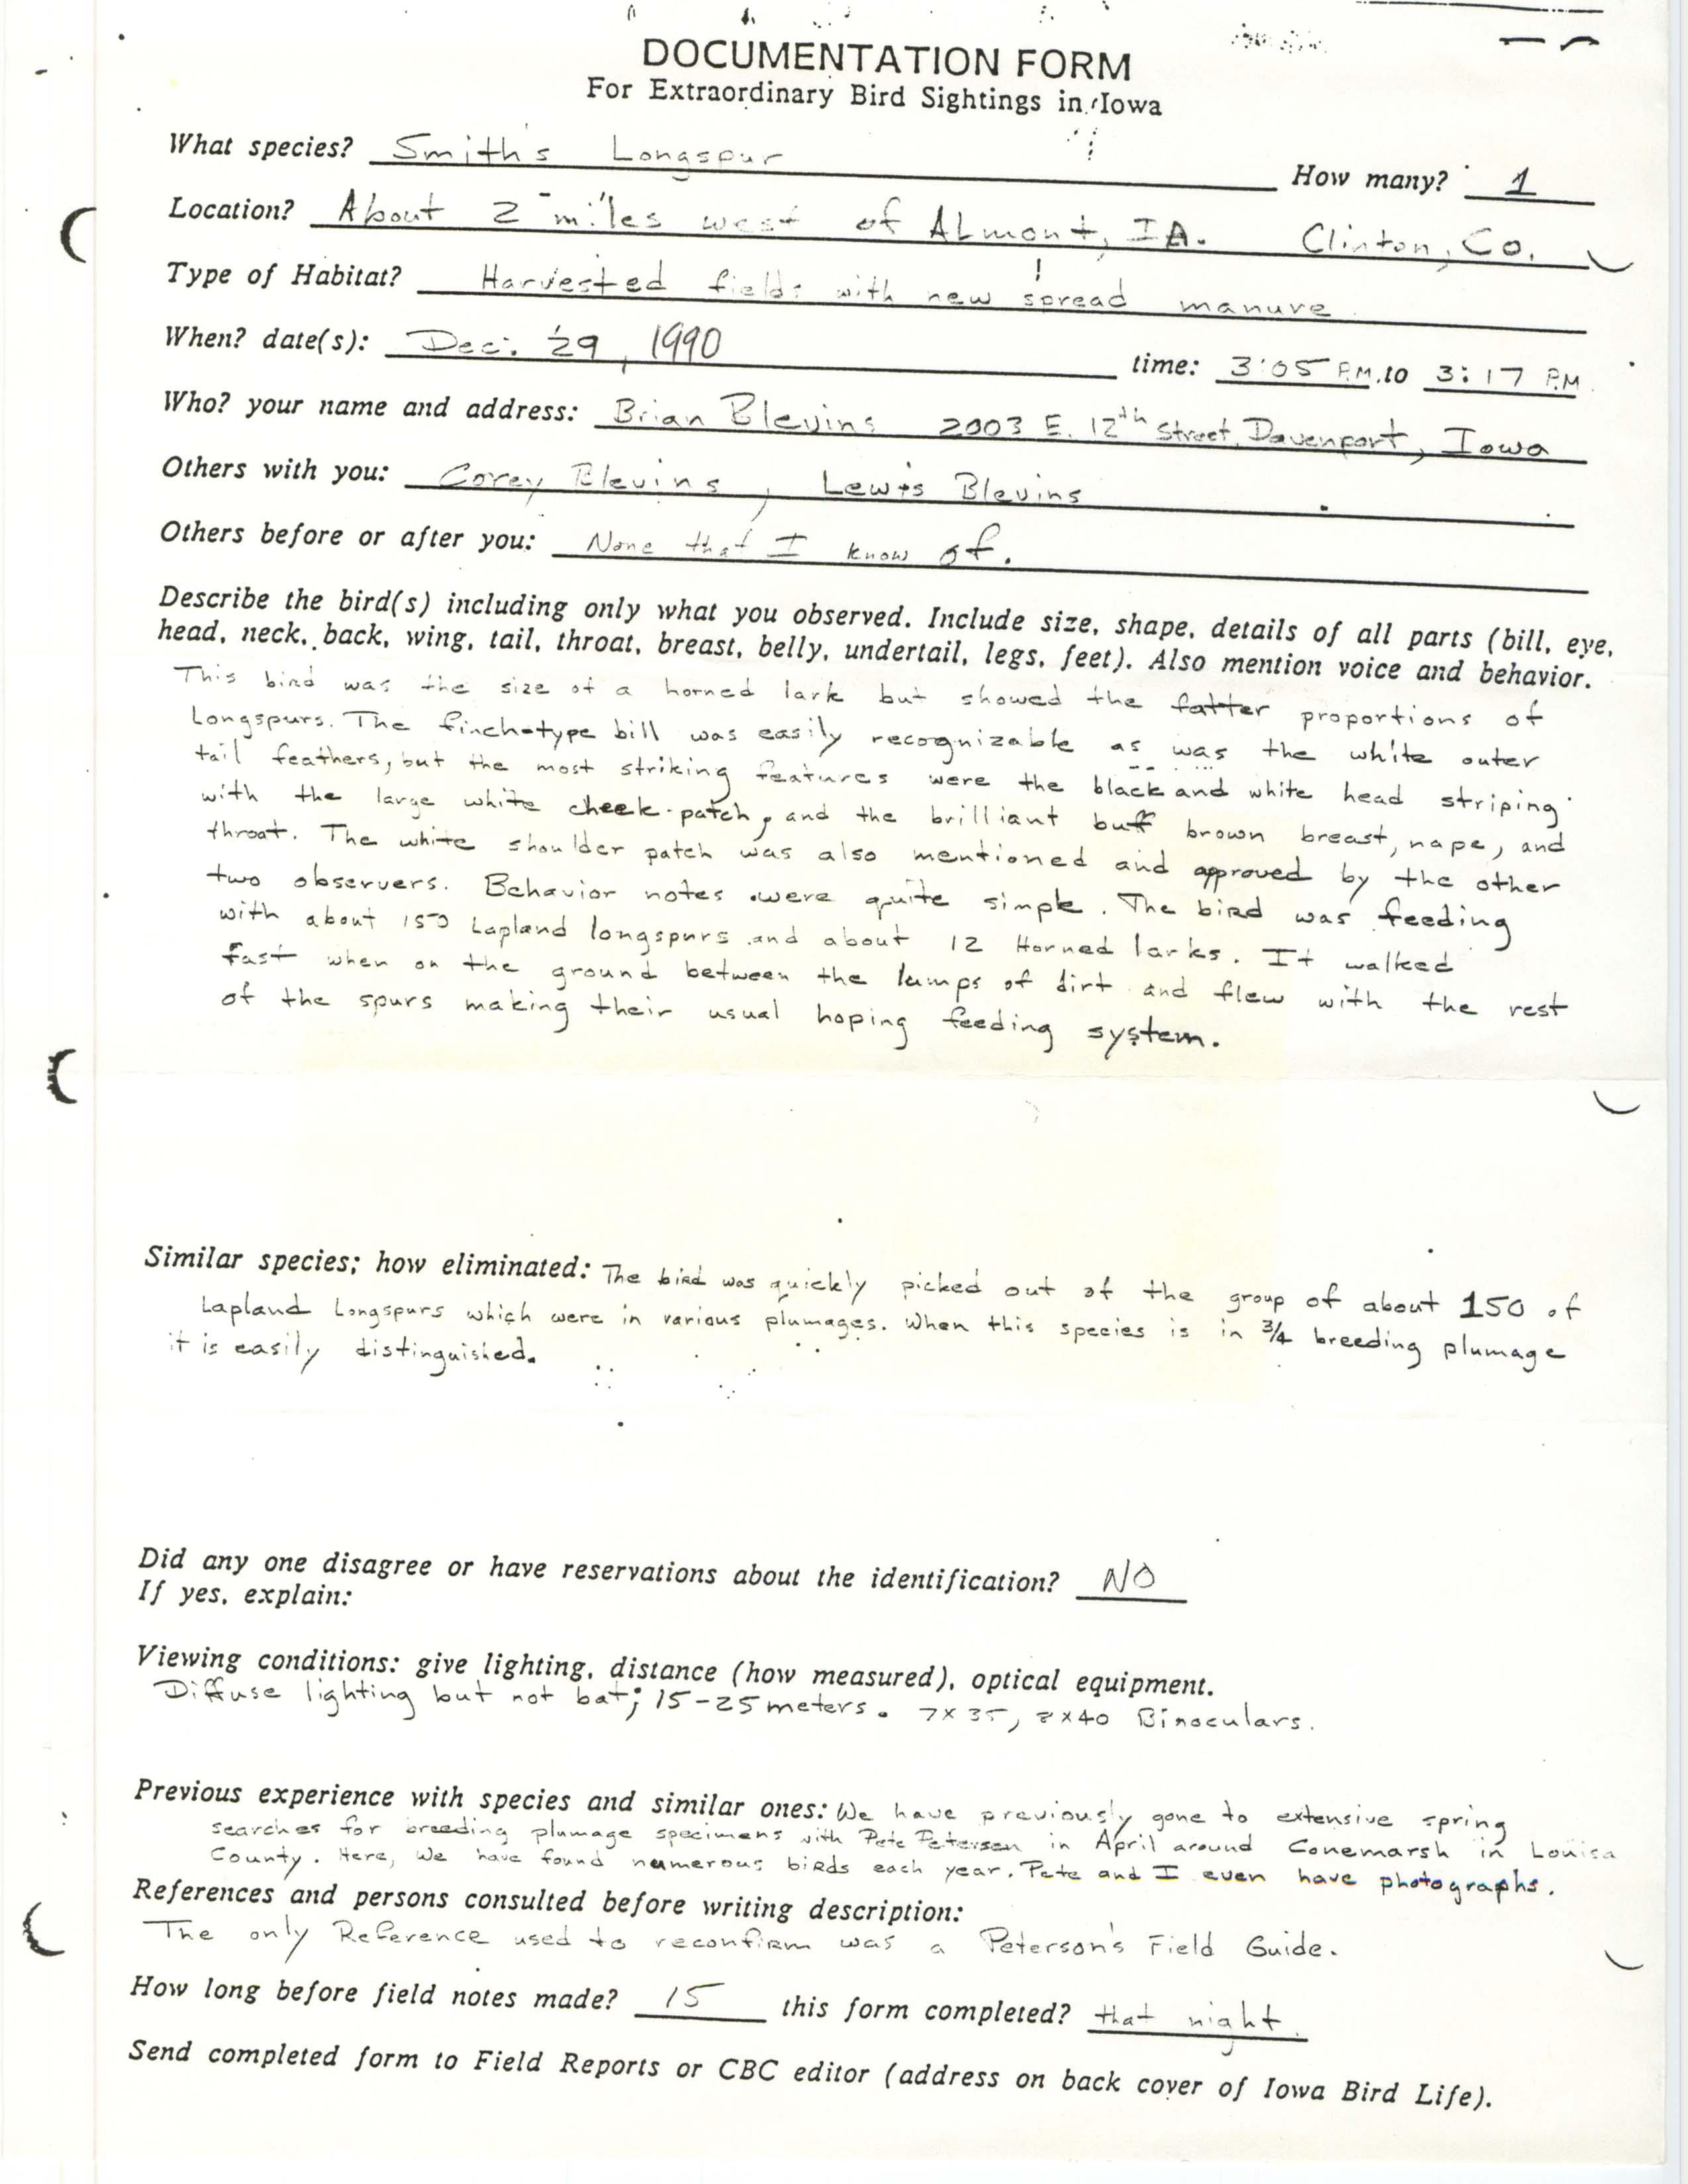 Rare bird documentation form for Smith's Longspur west of Almont, 1990